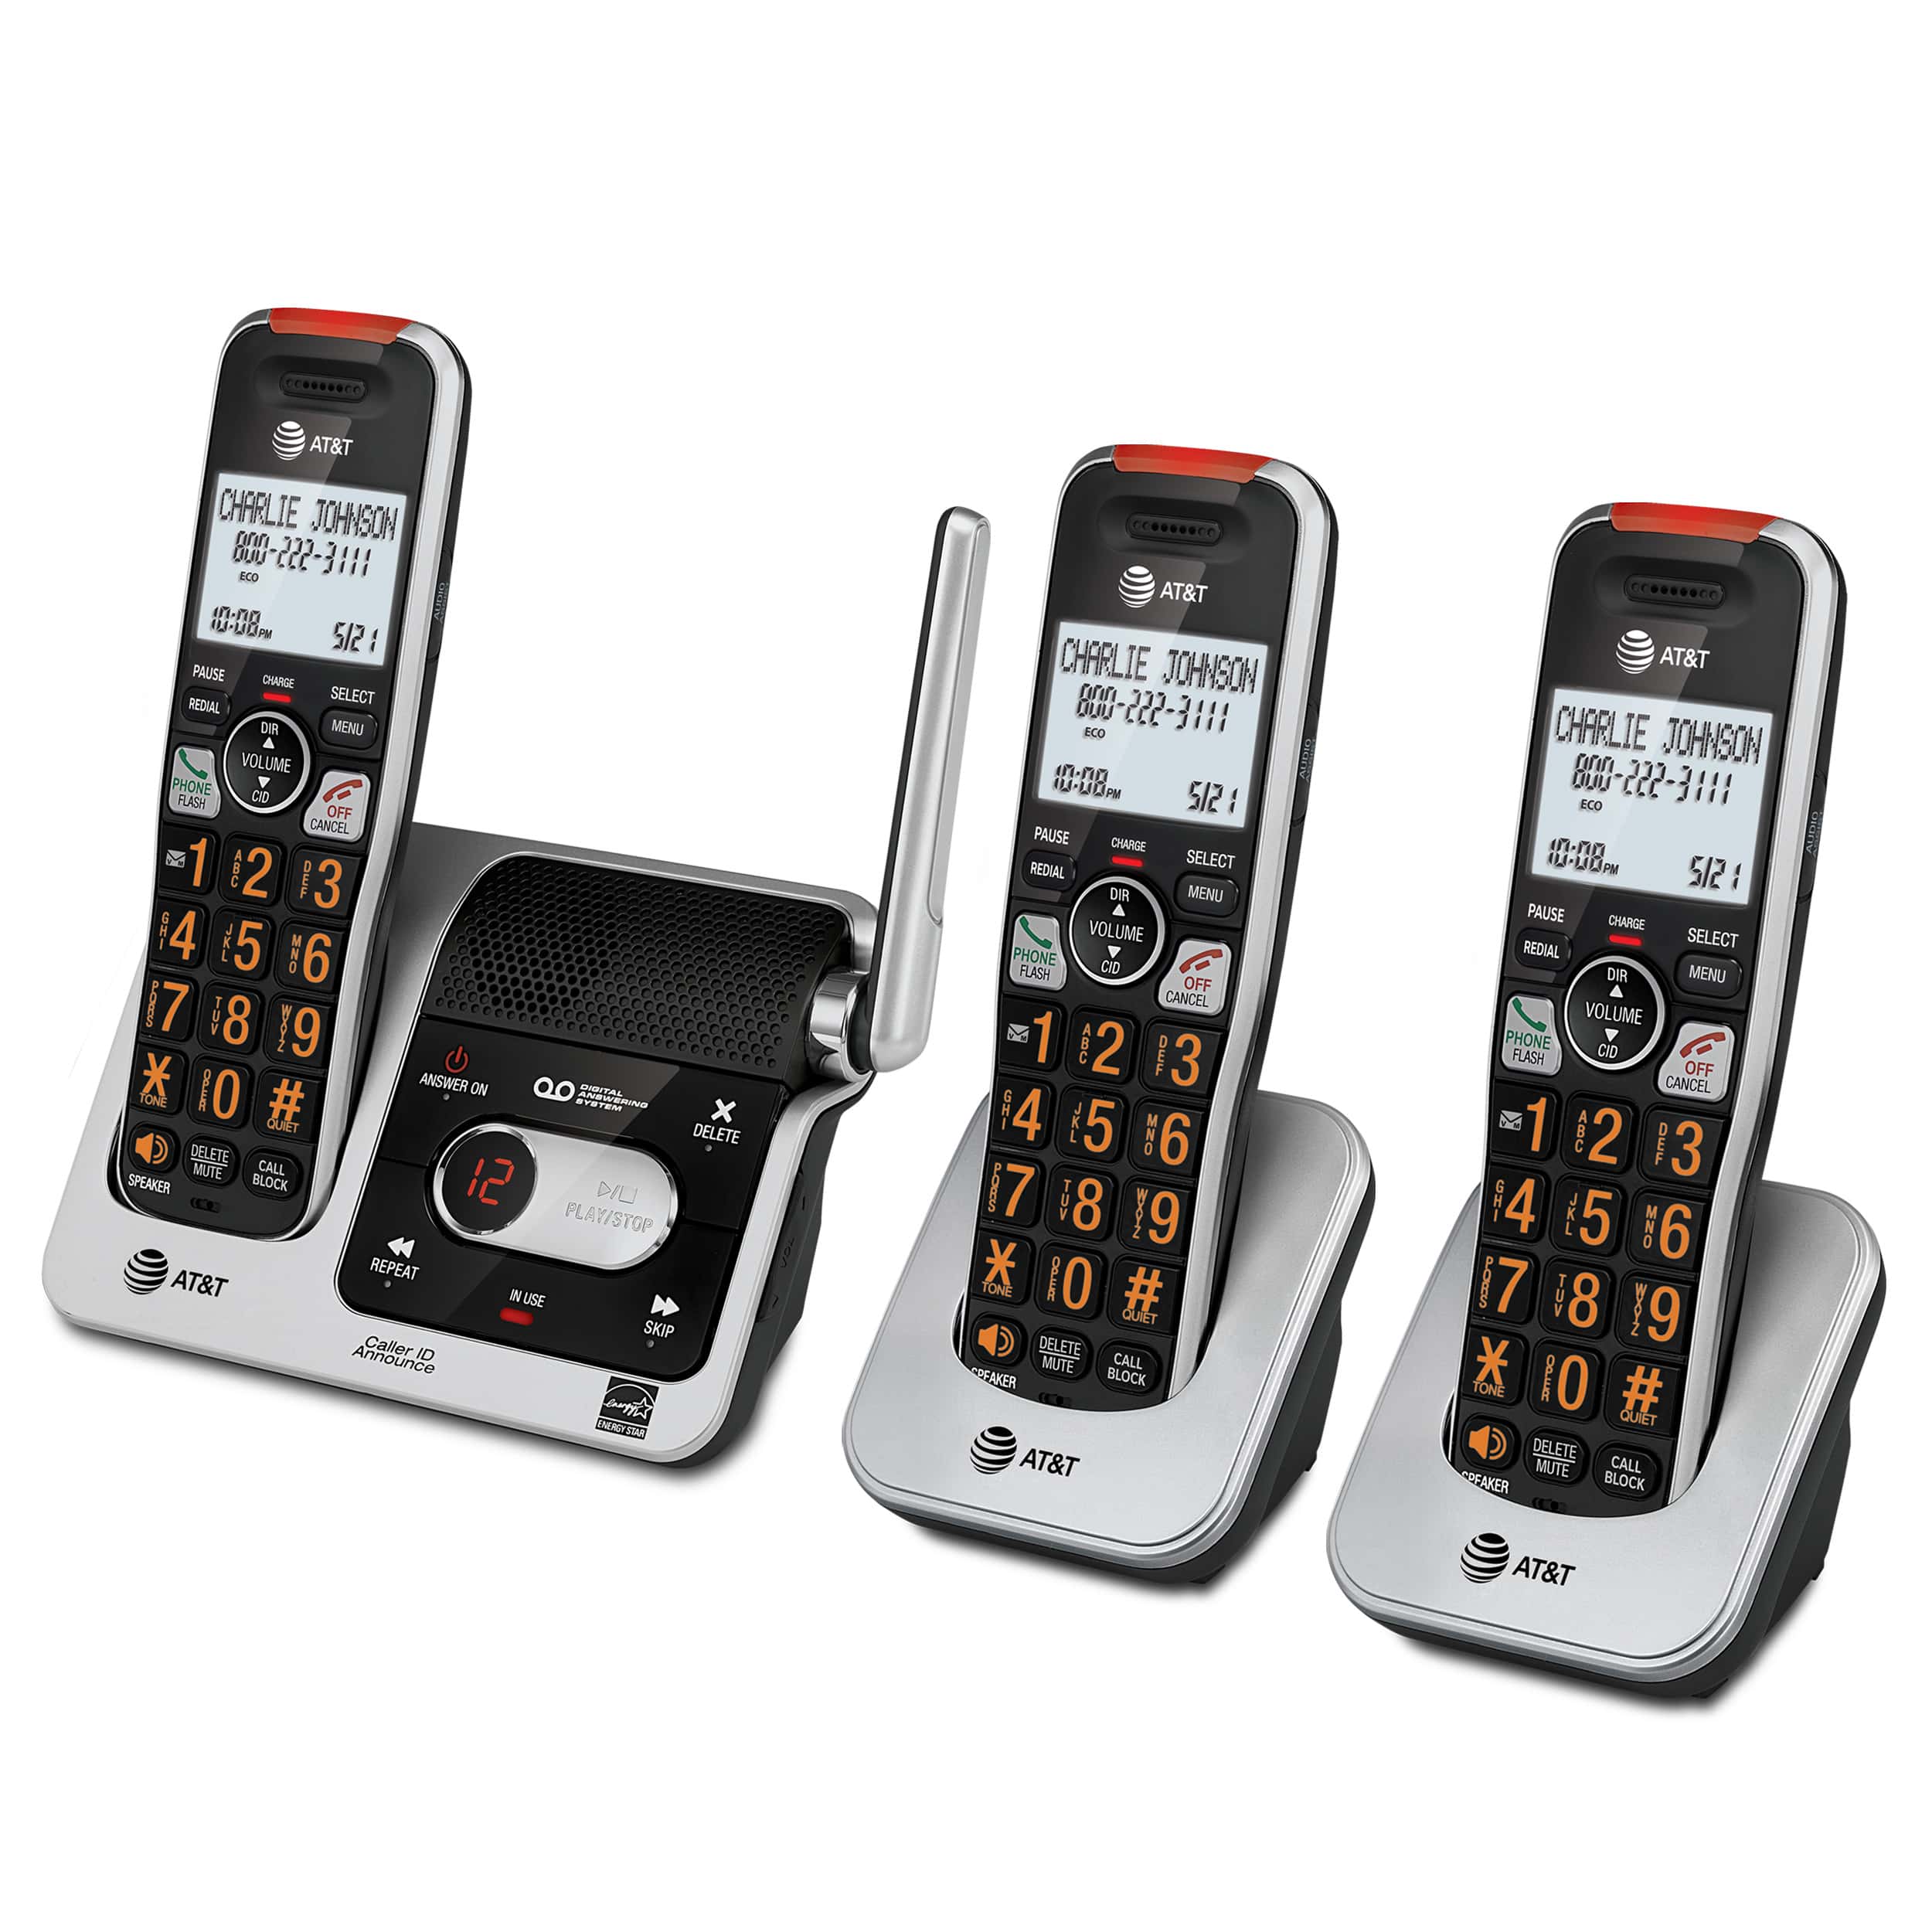 3-Handset Cordless Phone with Unsurpassed Range, Smart Call Blocker and Answering System - view 2